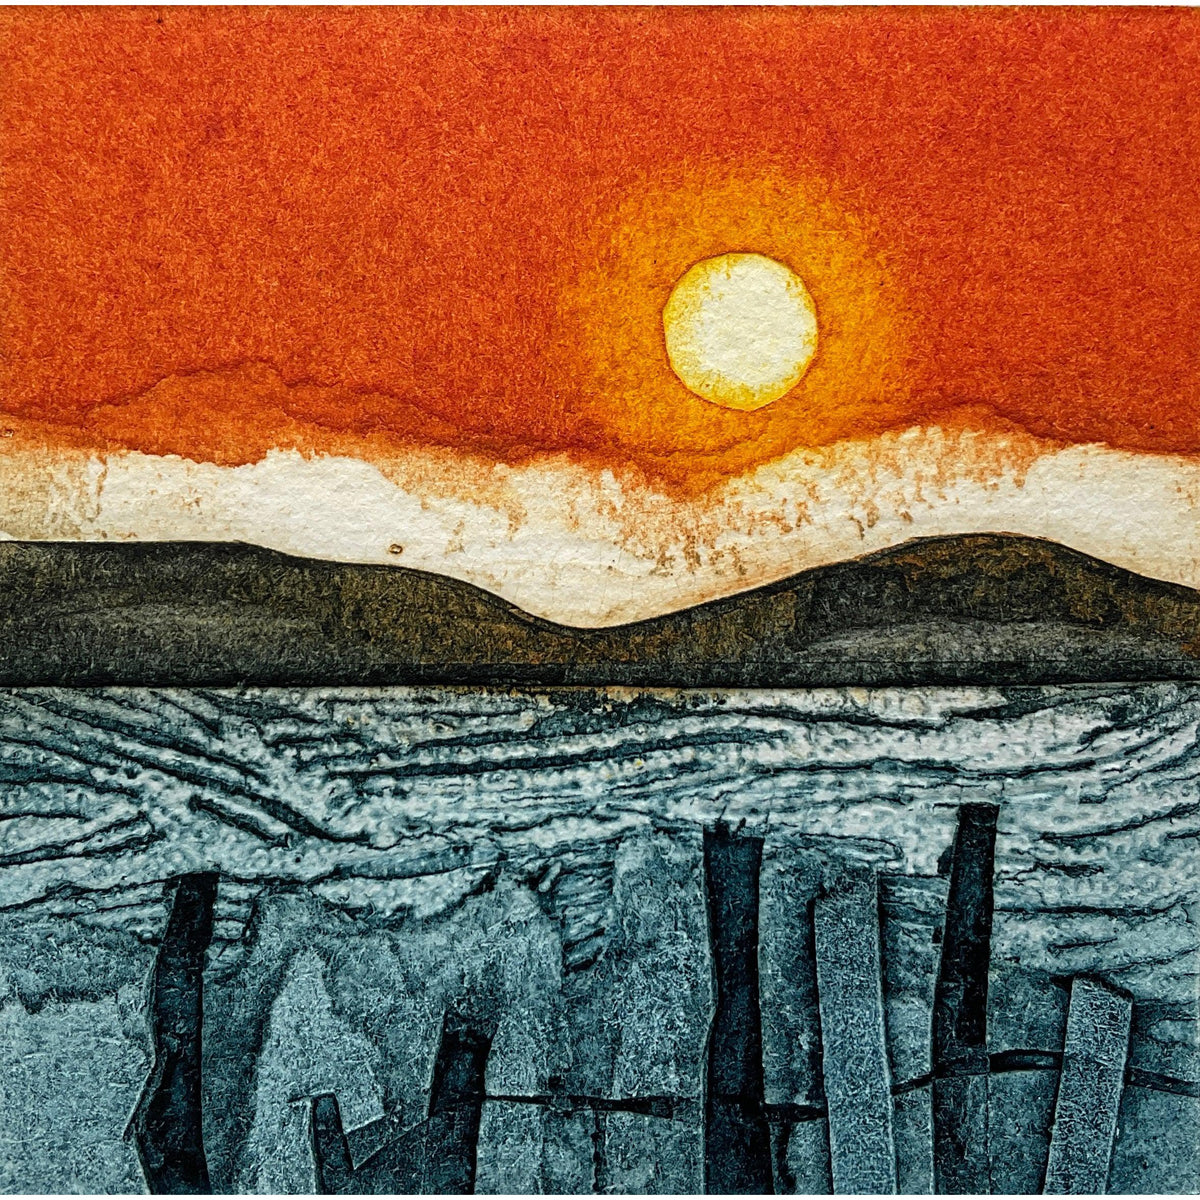 Farewell, limited edition collagraph  by Sarah Ross-Thompson available at Padstow Gallery, Cornwall